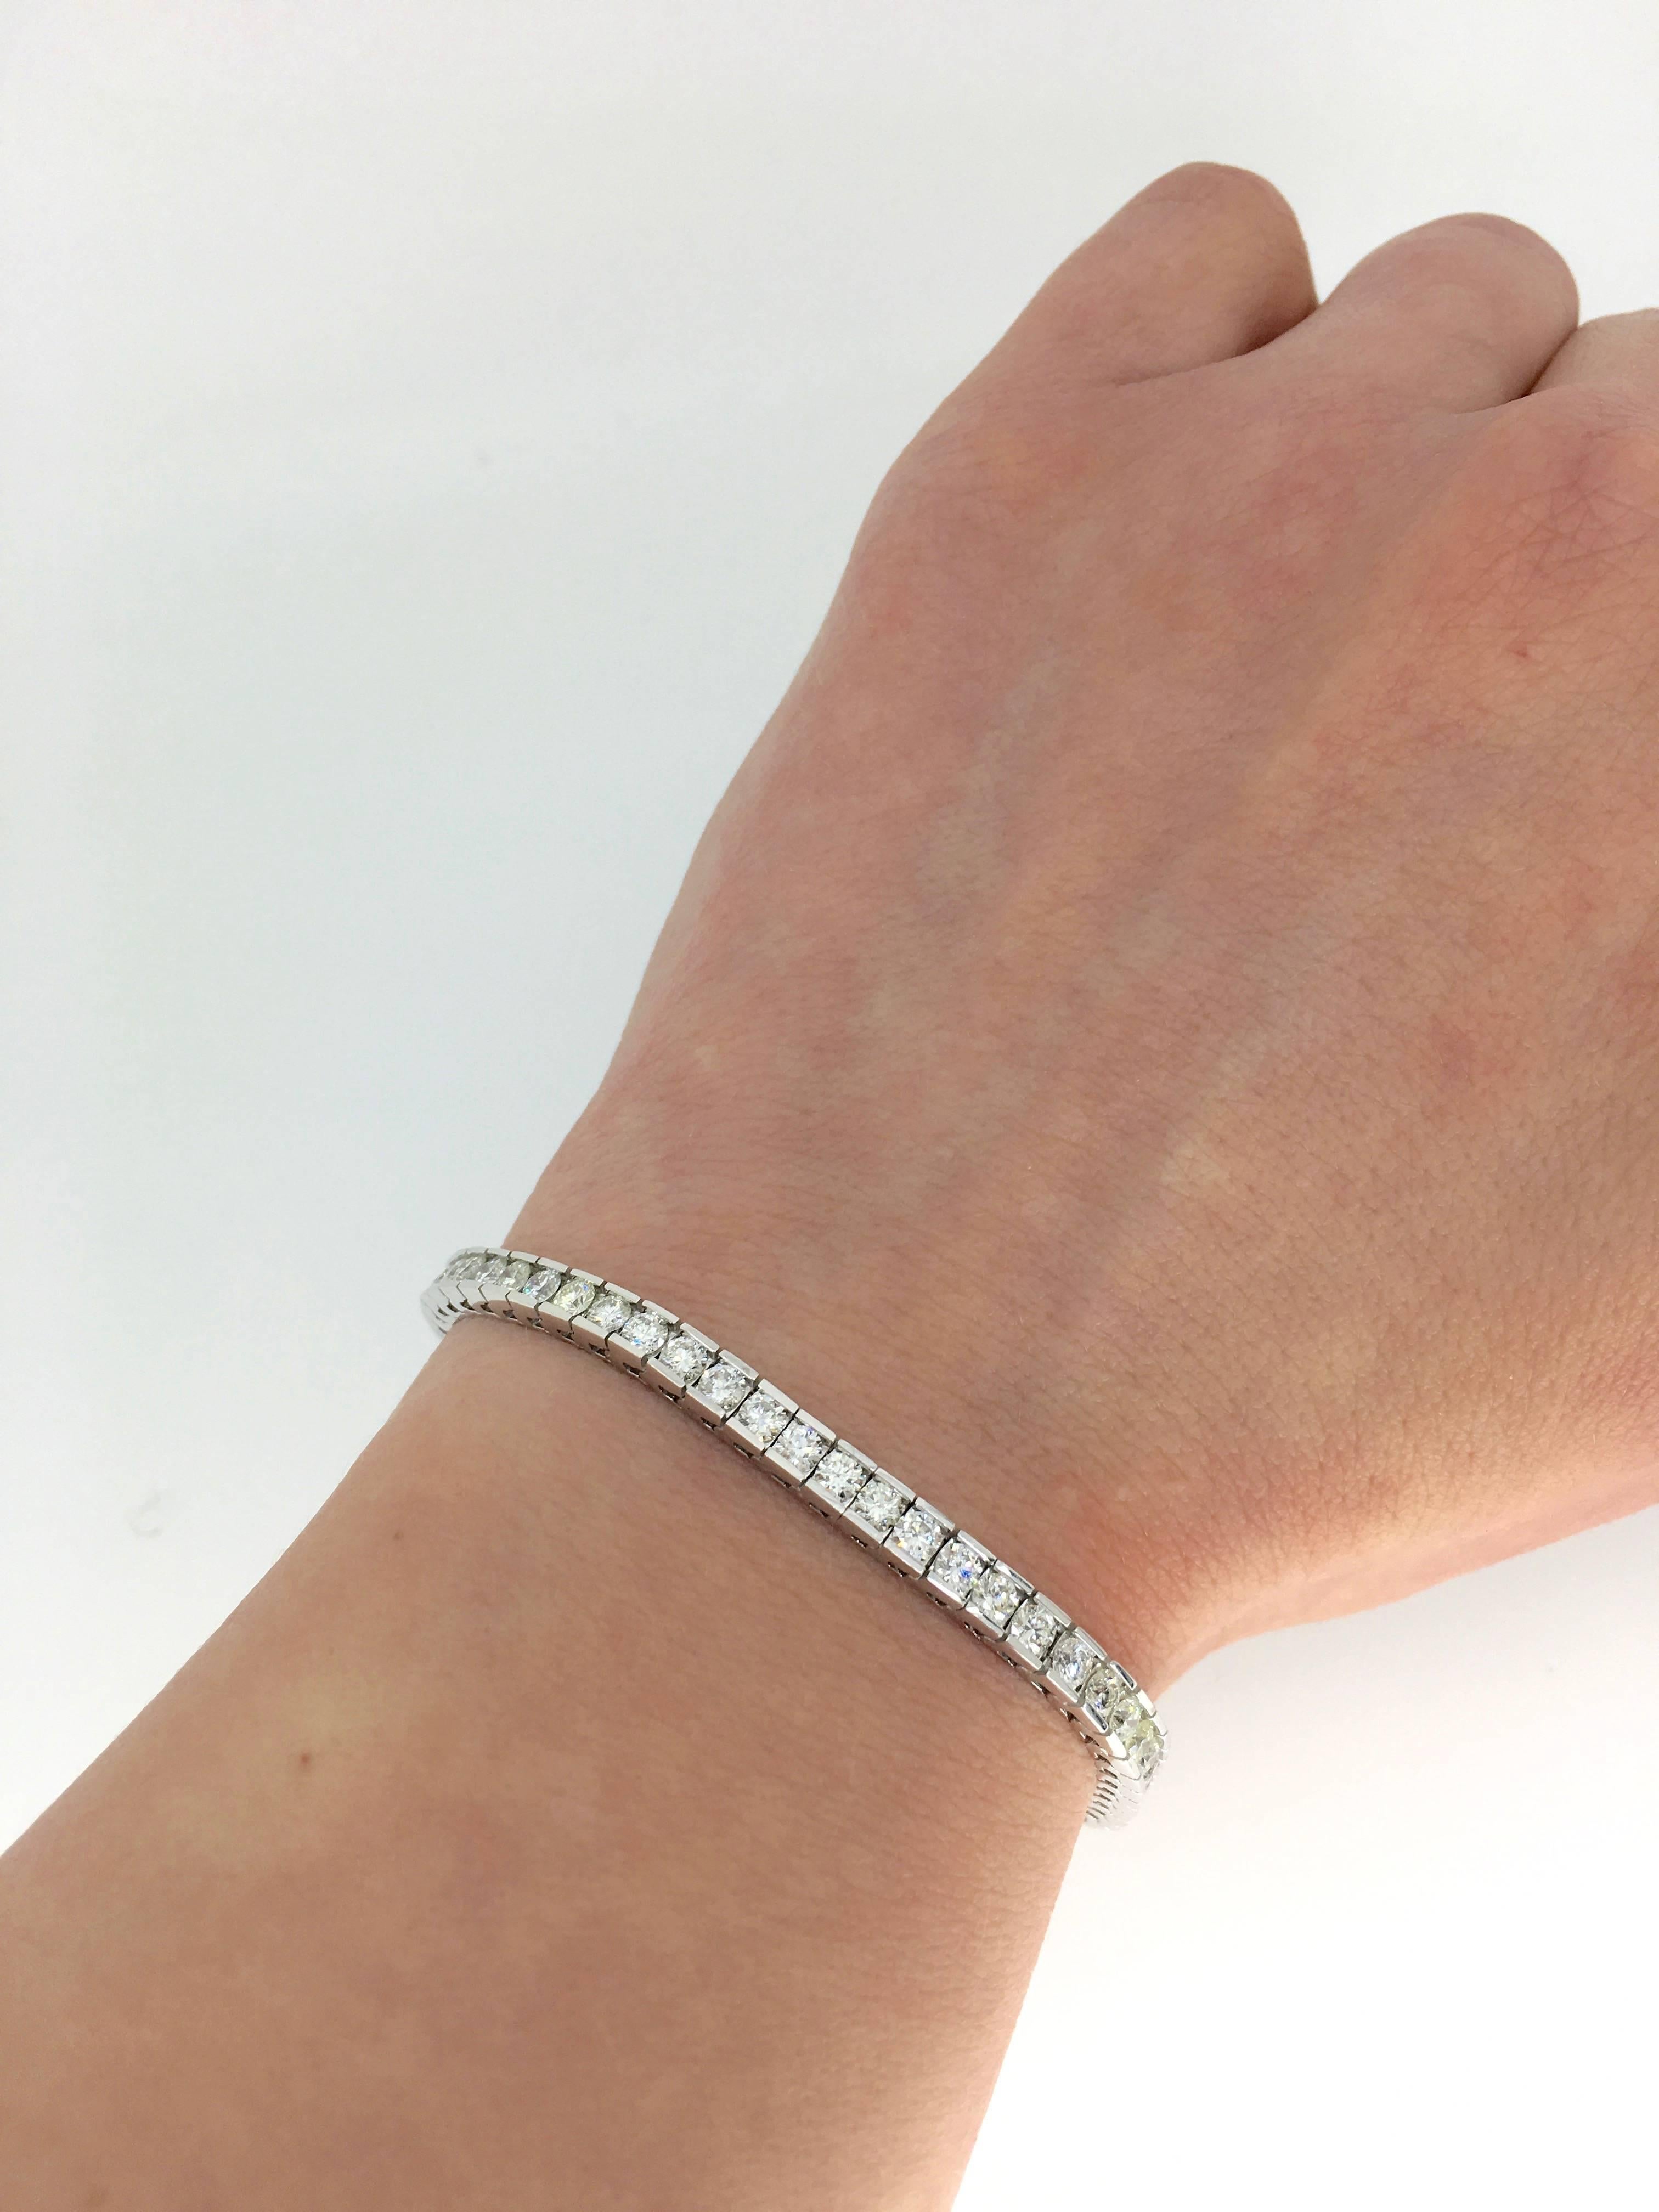 Beautiful bar set tennis bracelet features approximately 4.03CTW of Round Brilliant Cut Diamonds made up of 63 diamonds. The featured diamonds display an average color of G-J and an average clarity of SI. The bracelet is 7” long and weighs 14.4